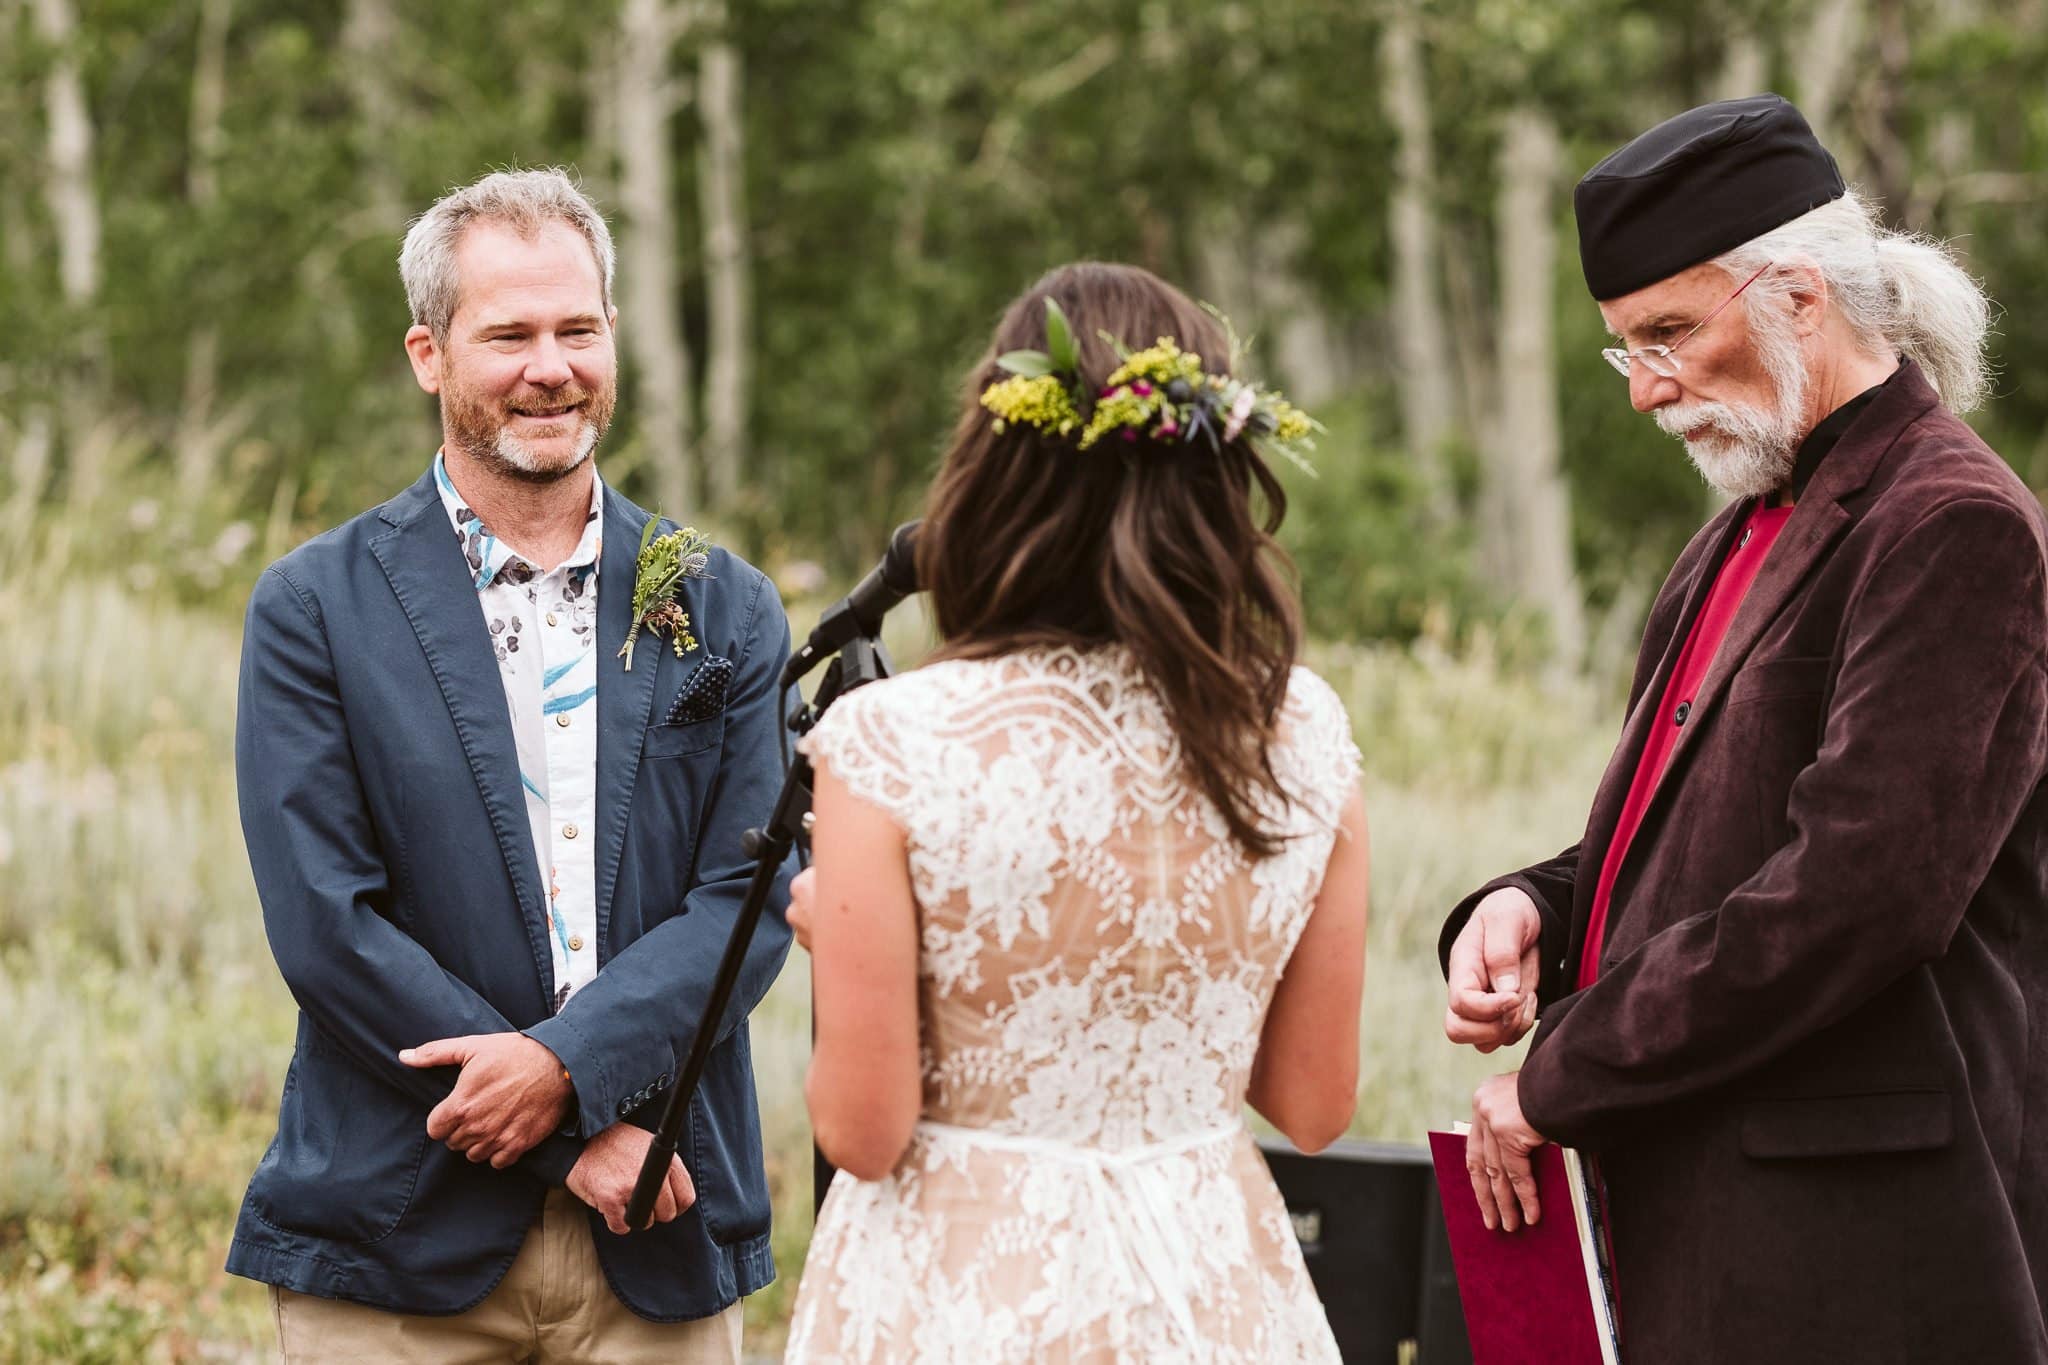 Woods Walk wedding ceremony in Crested Butte, Colorado wedding photographer